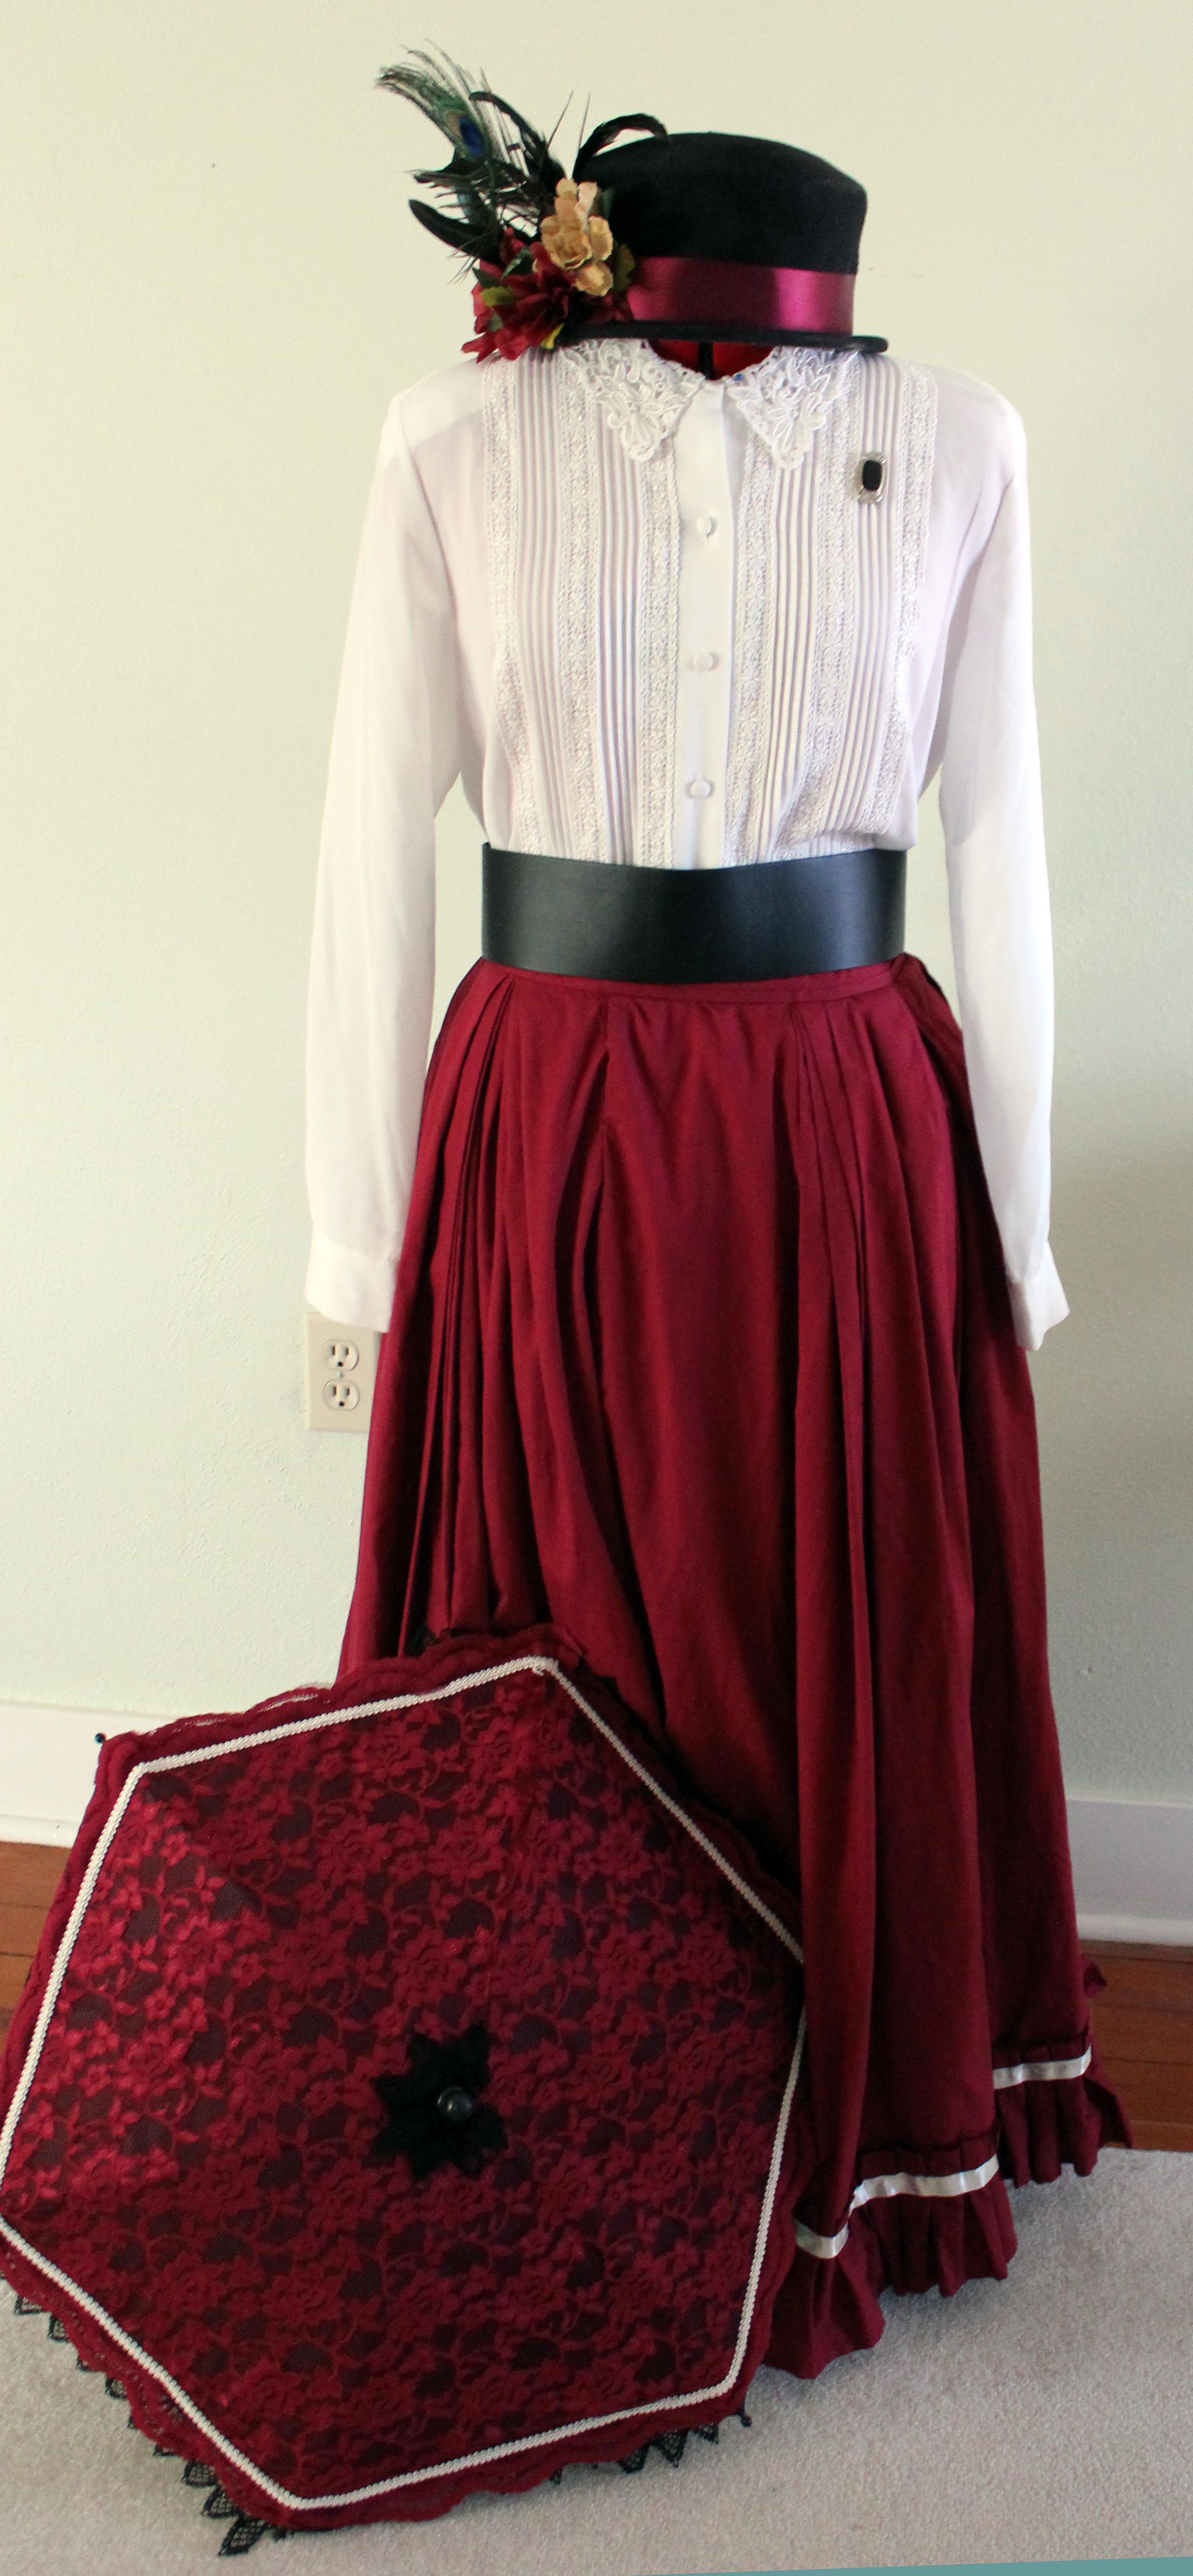 Make an Easy Victorian Costume Dress with a Skirt and Blouse